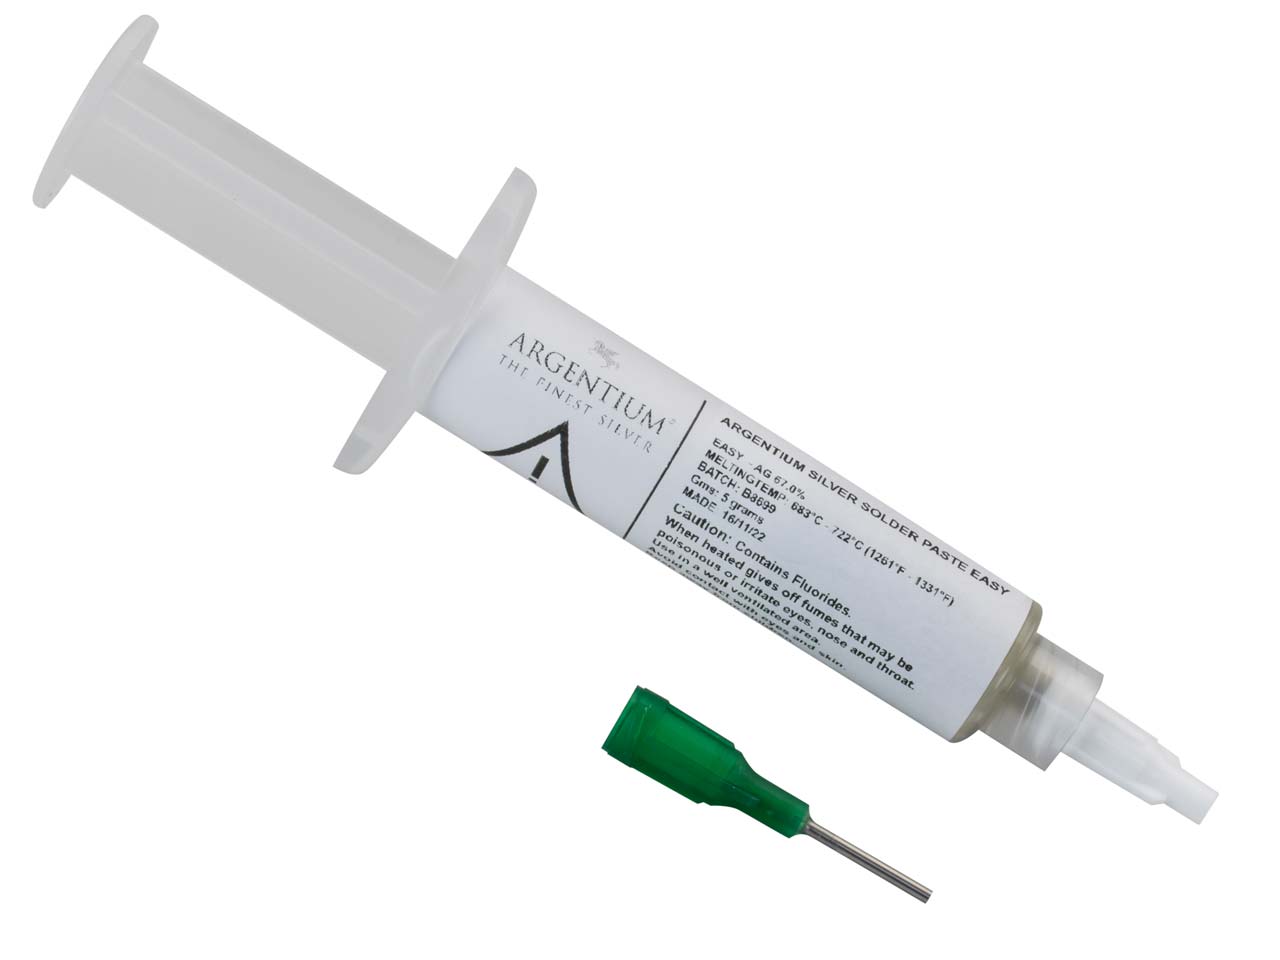 Argentium Silver Solder Paste 5g Easy, Syringe Questions & Answers